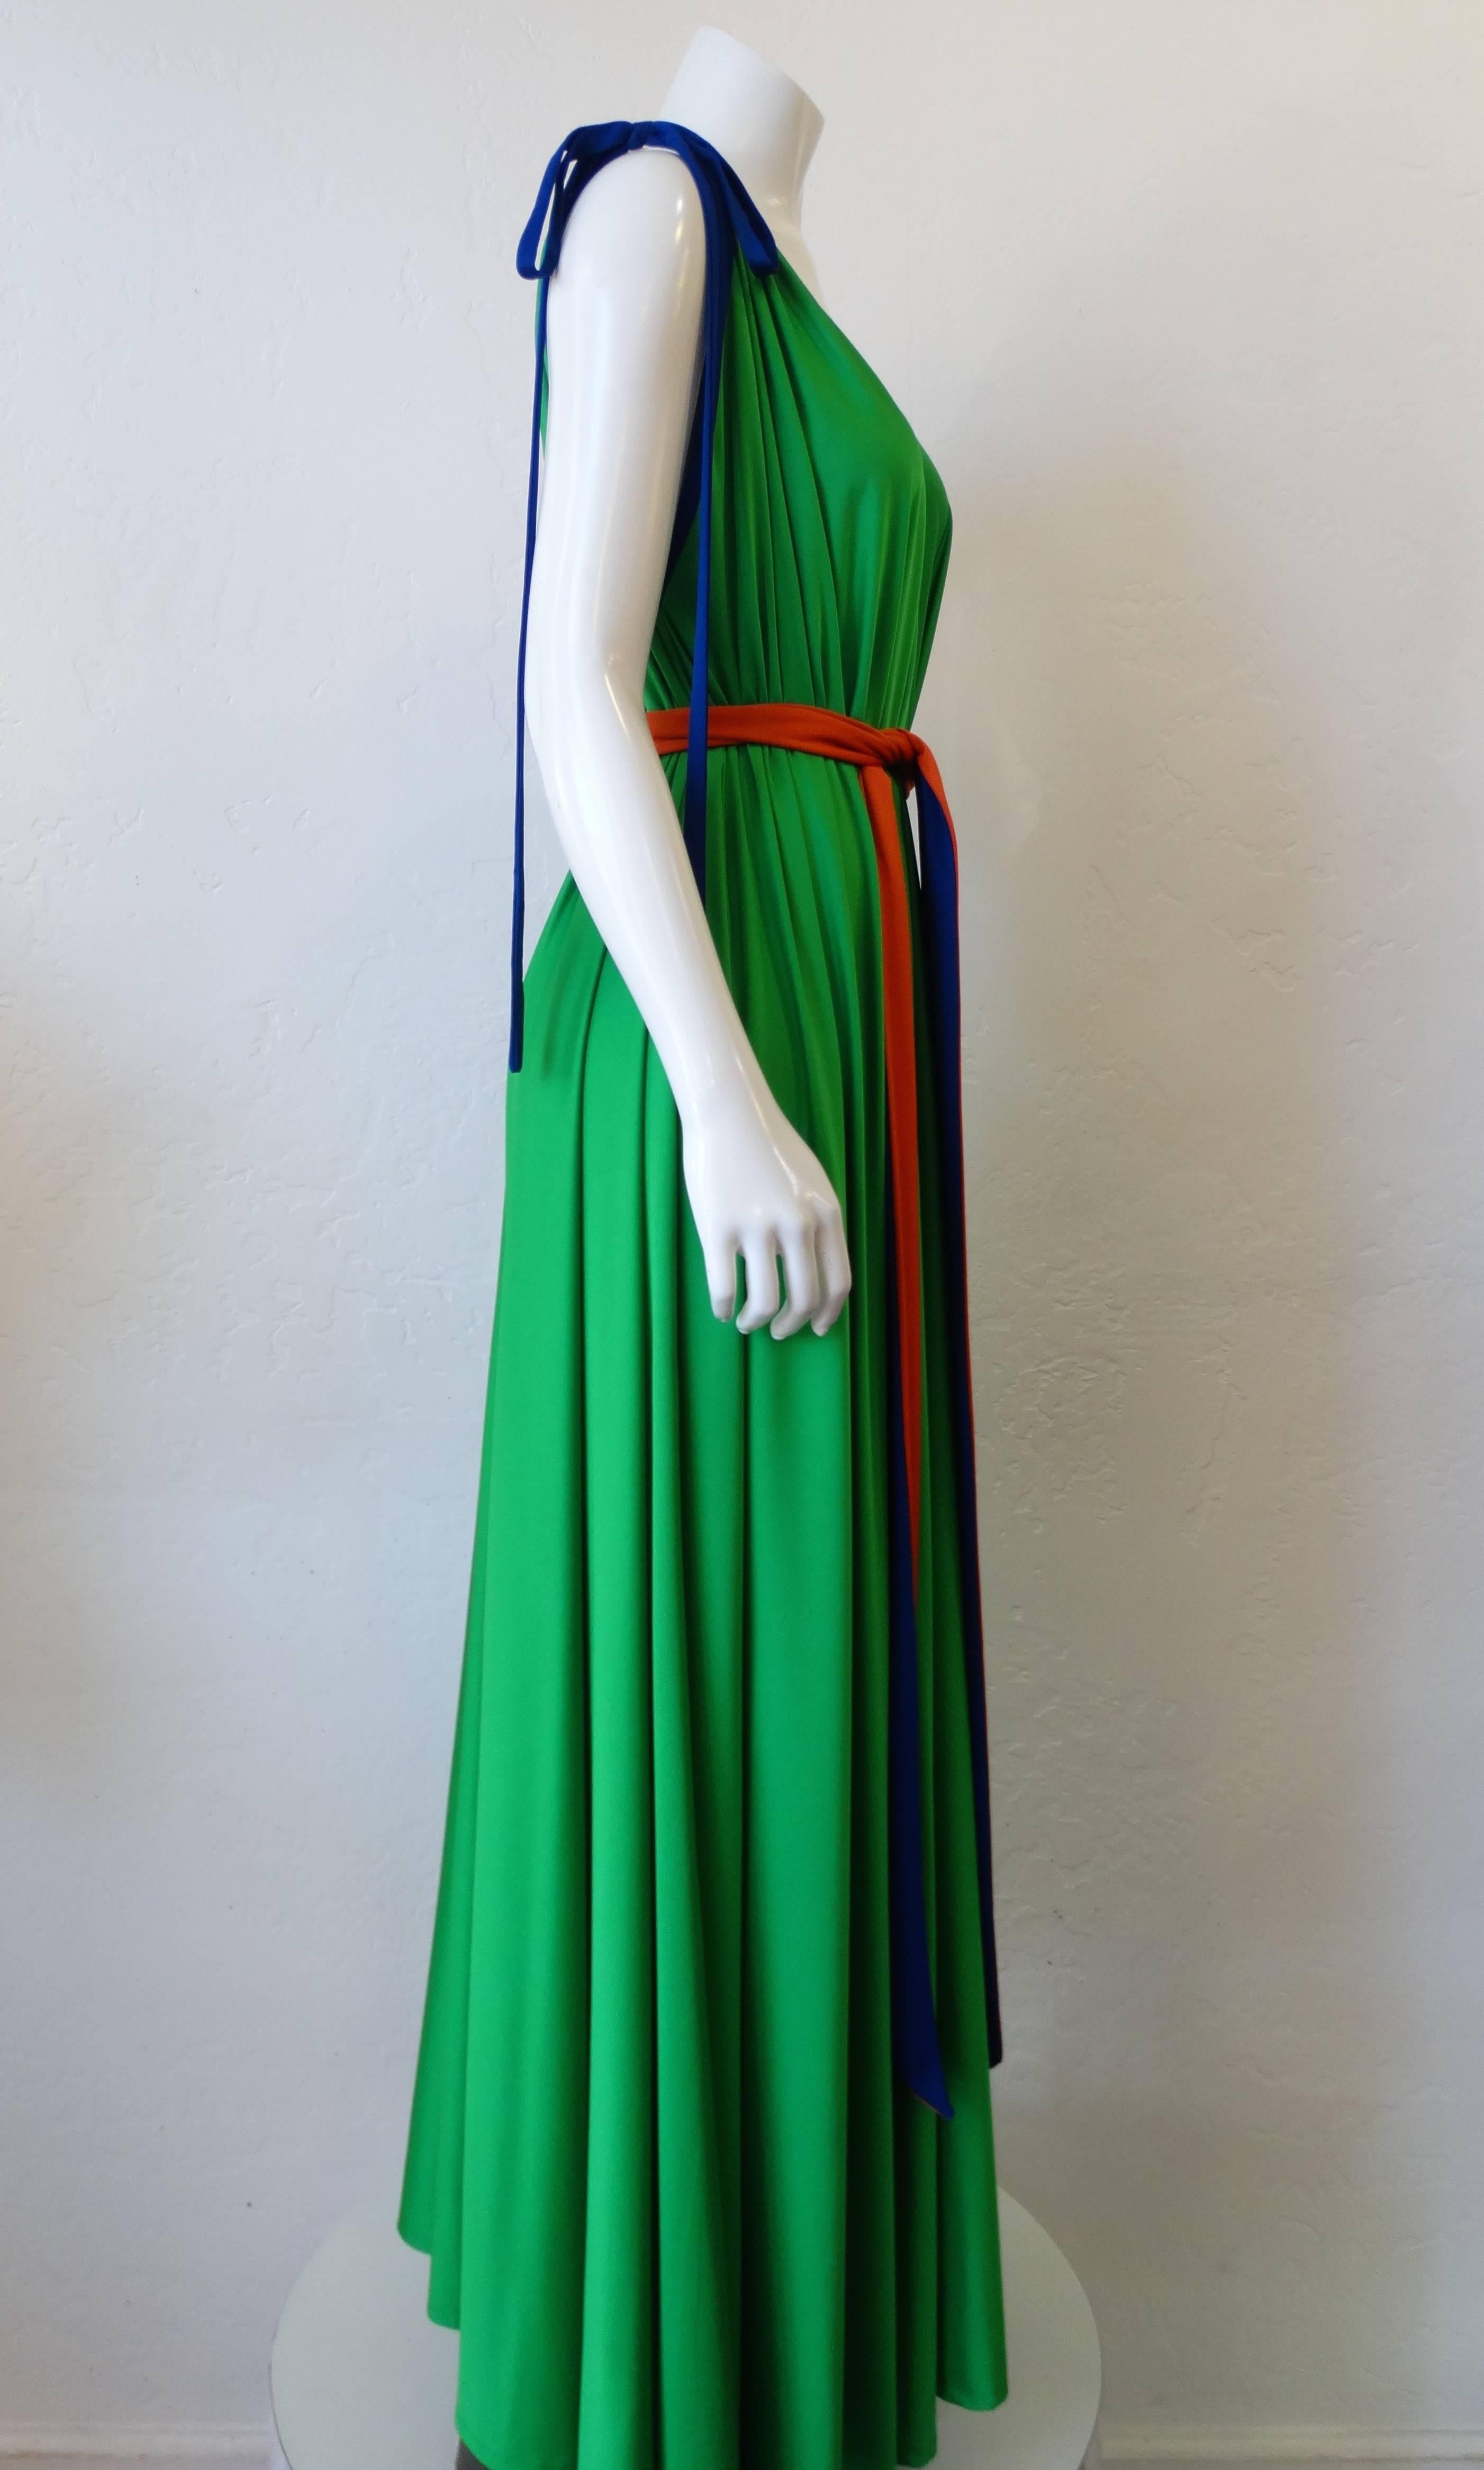 We are obsessing over this Tori Richard Honolulu dress from the 1970s! Beautiful kelly green color accented with complementary blue and orange. Trapeze fit cinched in with matching tie. Two blue bows on either shoulder for an adjustable fit. This